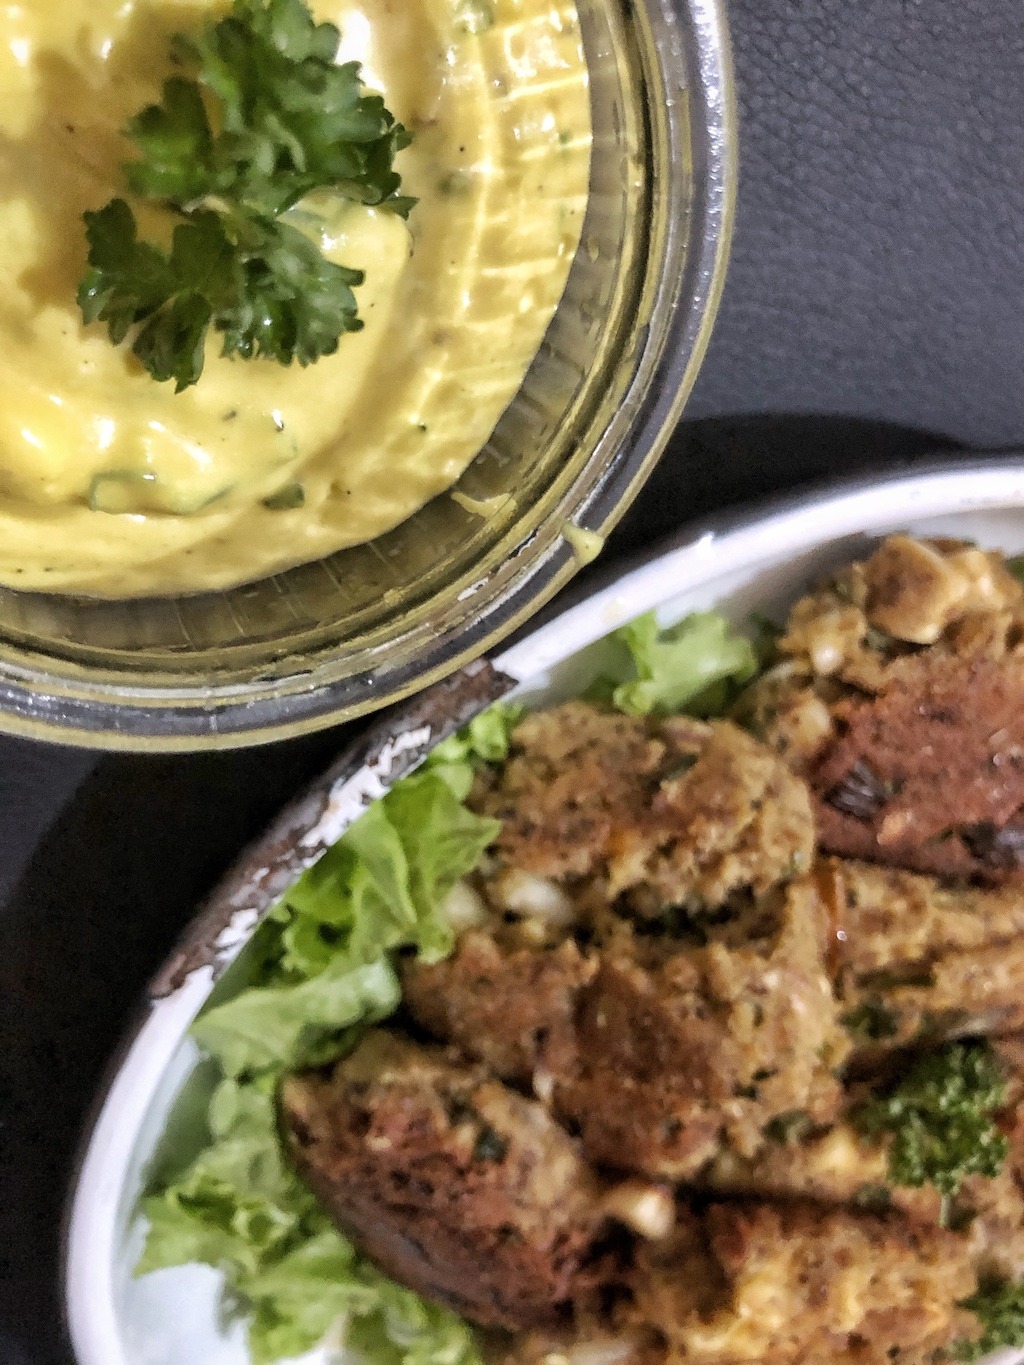 Easy Creamy Mustard BBQ Sauce For Fish Beef Or Chicken - Healthy Keto